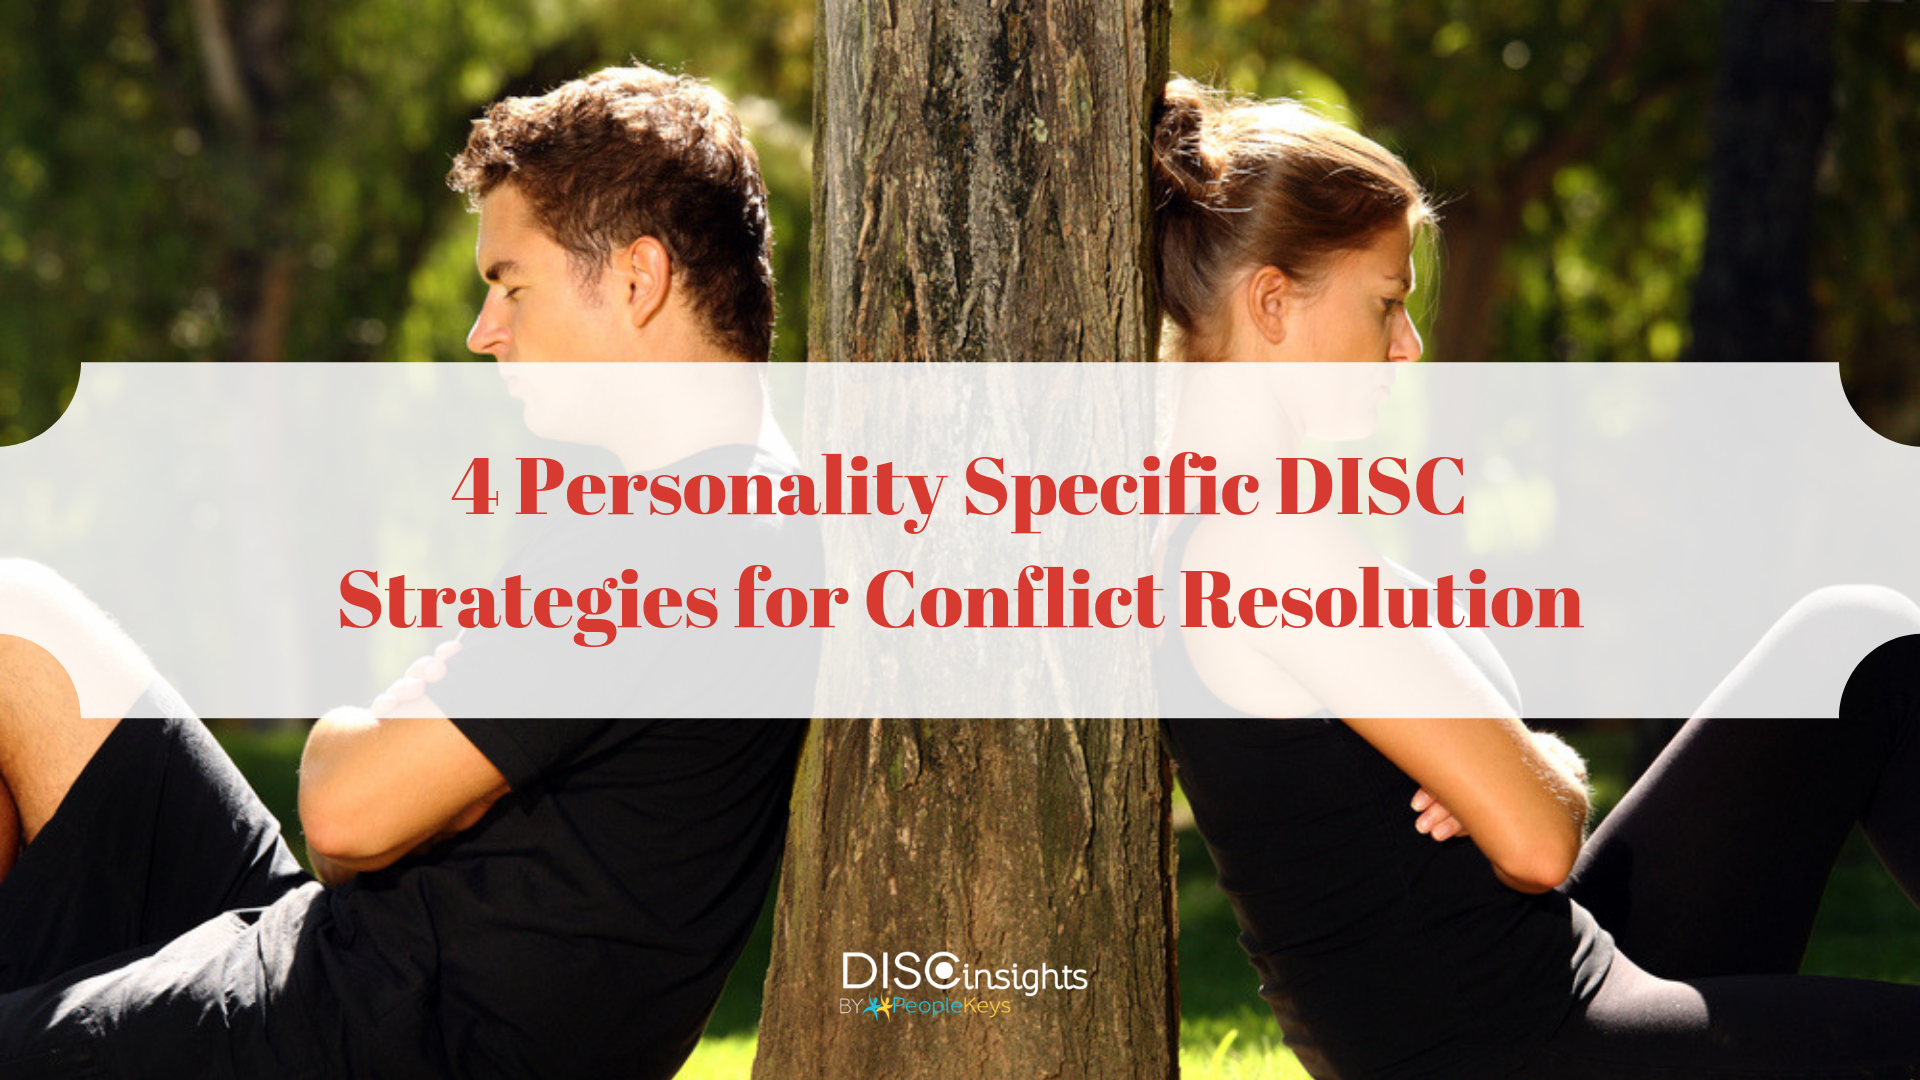 4 Personality Specific DISC Strategies for Conflict Resolution